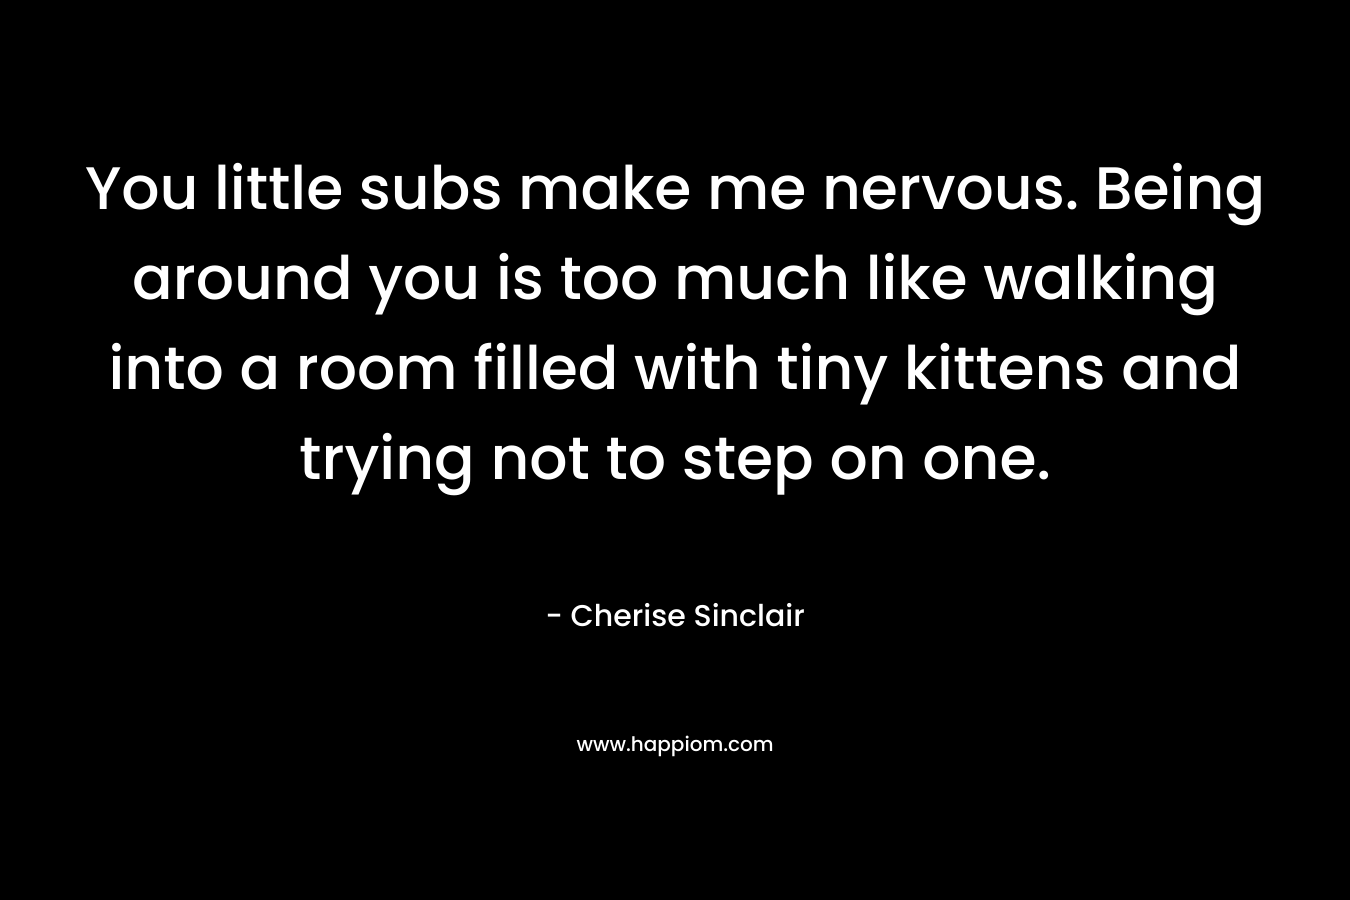 You little subs make me nervous. Being around you is too much like walking into a room filled with tiny kittens and trying not to step on one. – Cherise Sinclair